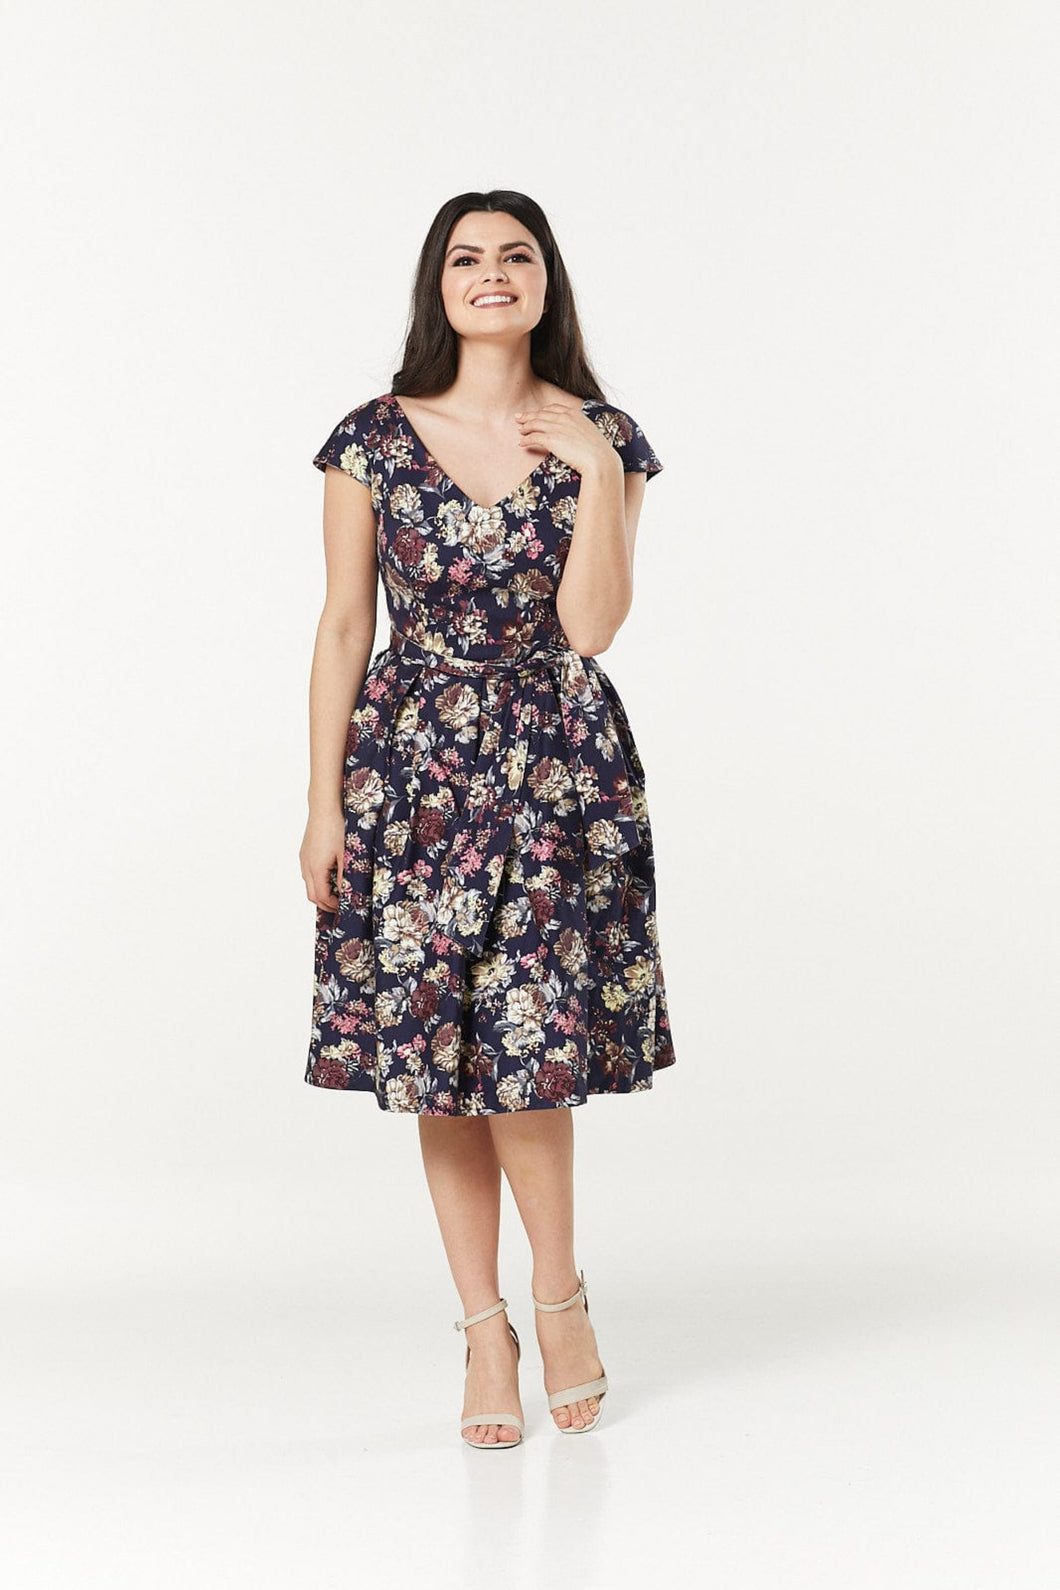 TIMELESS- SHADES OF PURPLE FLORAL DRESS